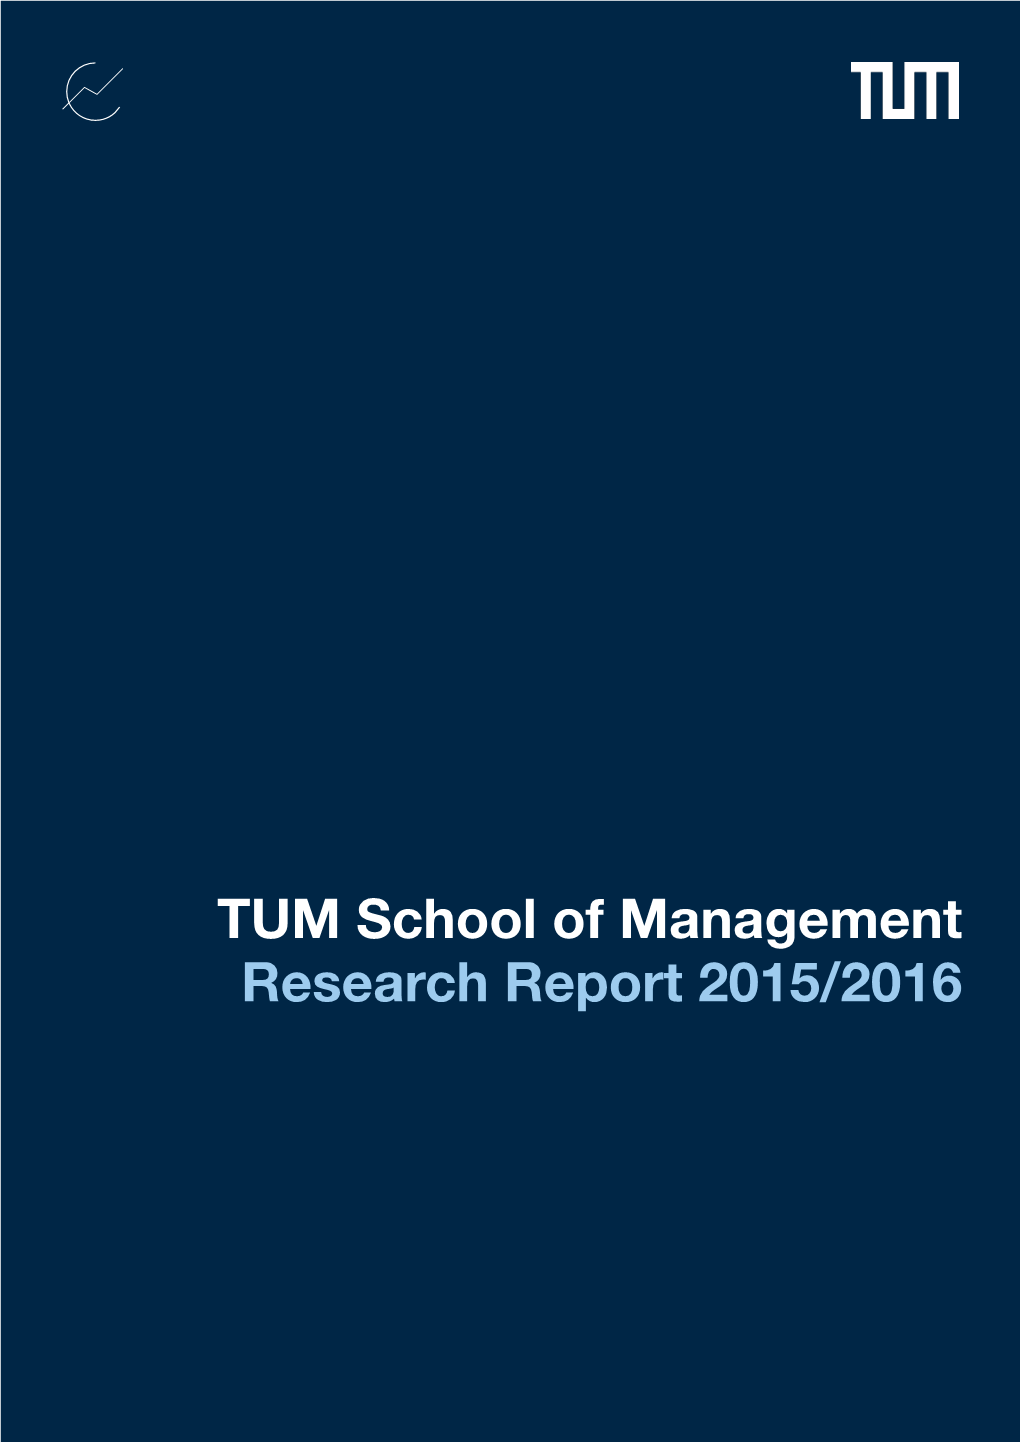 TUM School of Management Research Report 2015/2016 Contents